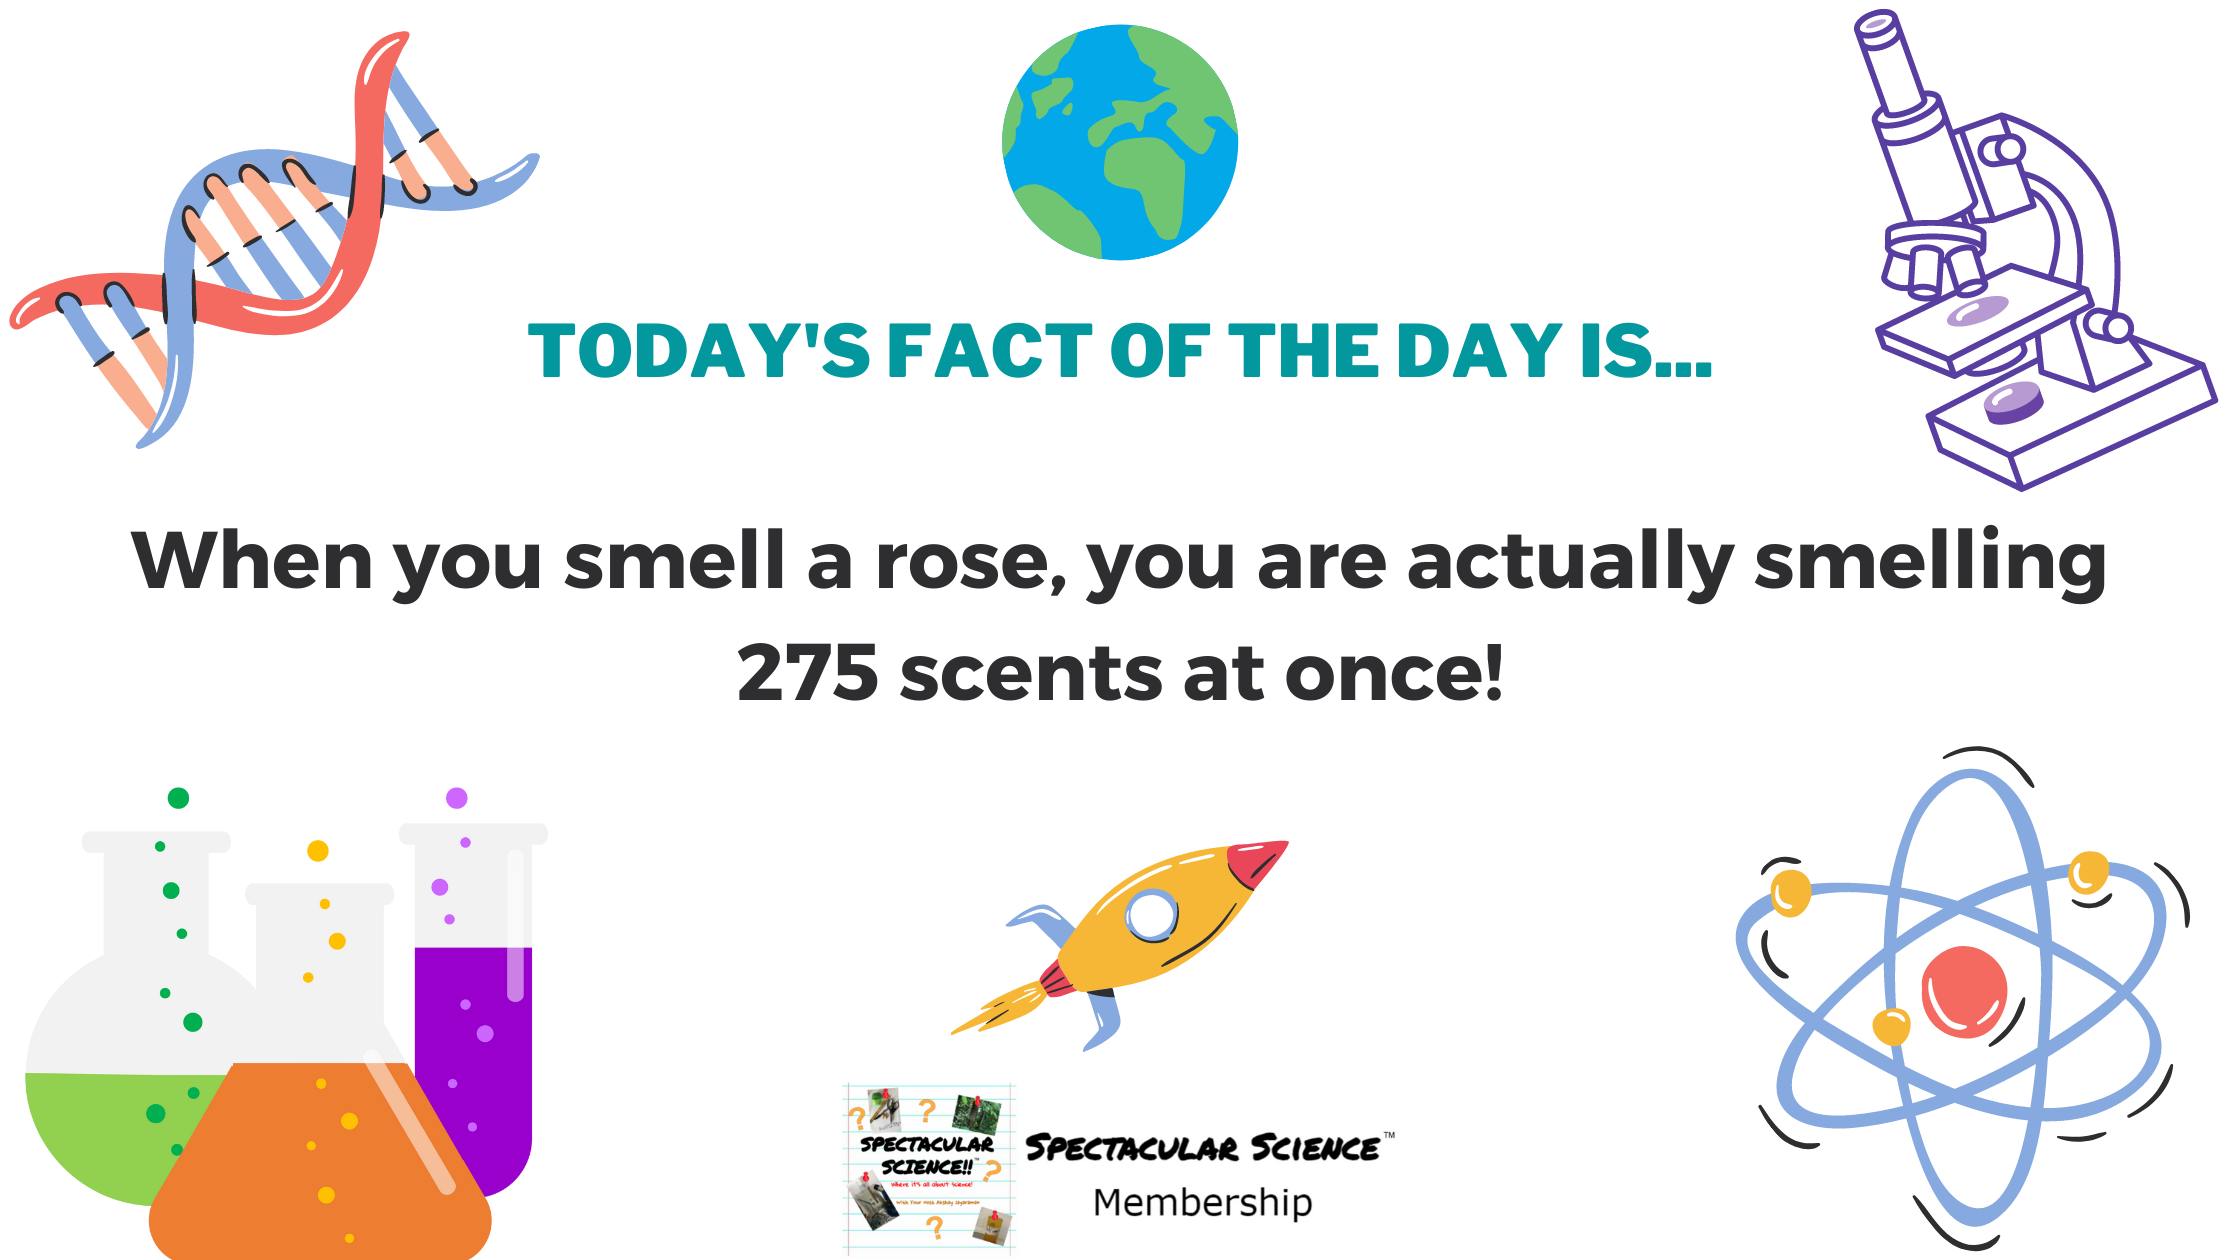 Fact of the Day Image Apr. 24th